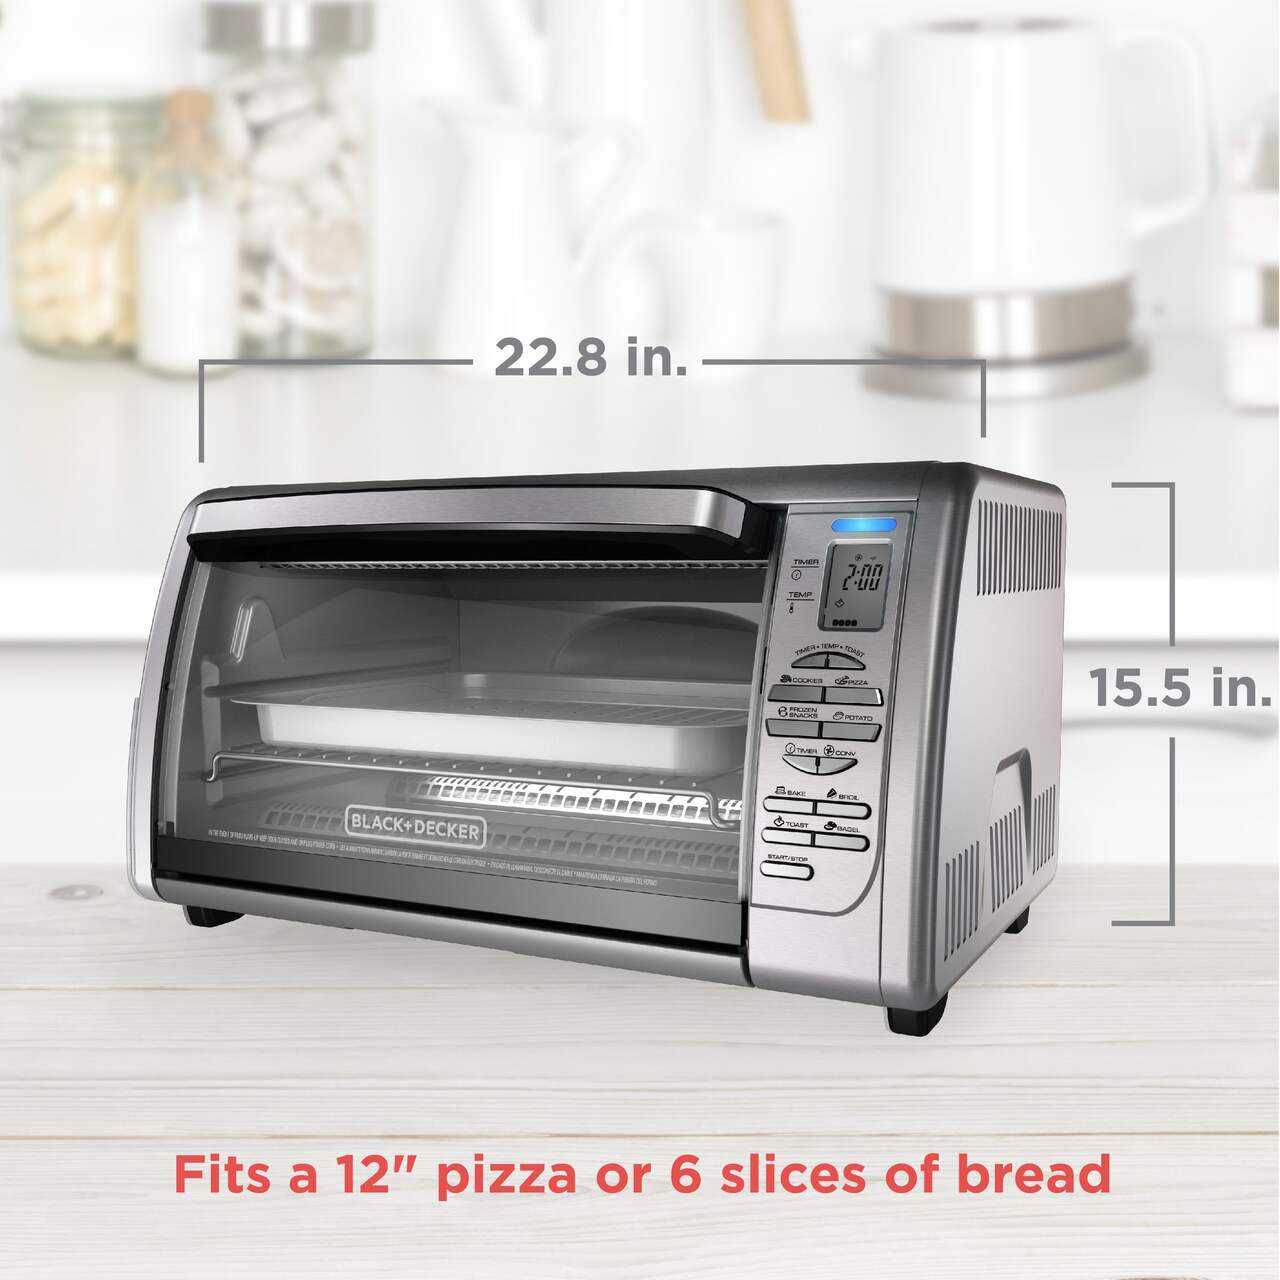 https://media-www.canadiantire.ca/product/living/kitchen/kitchen-appliances/0430147/black-decker-6-slice-digital-convection-toaster-oven-906f72fc-41b2-4fc8-ad6b-1c1157213fcd-jpgrendition.jpg?imdensity=1&imwidth=1244&impolicy=mZoom